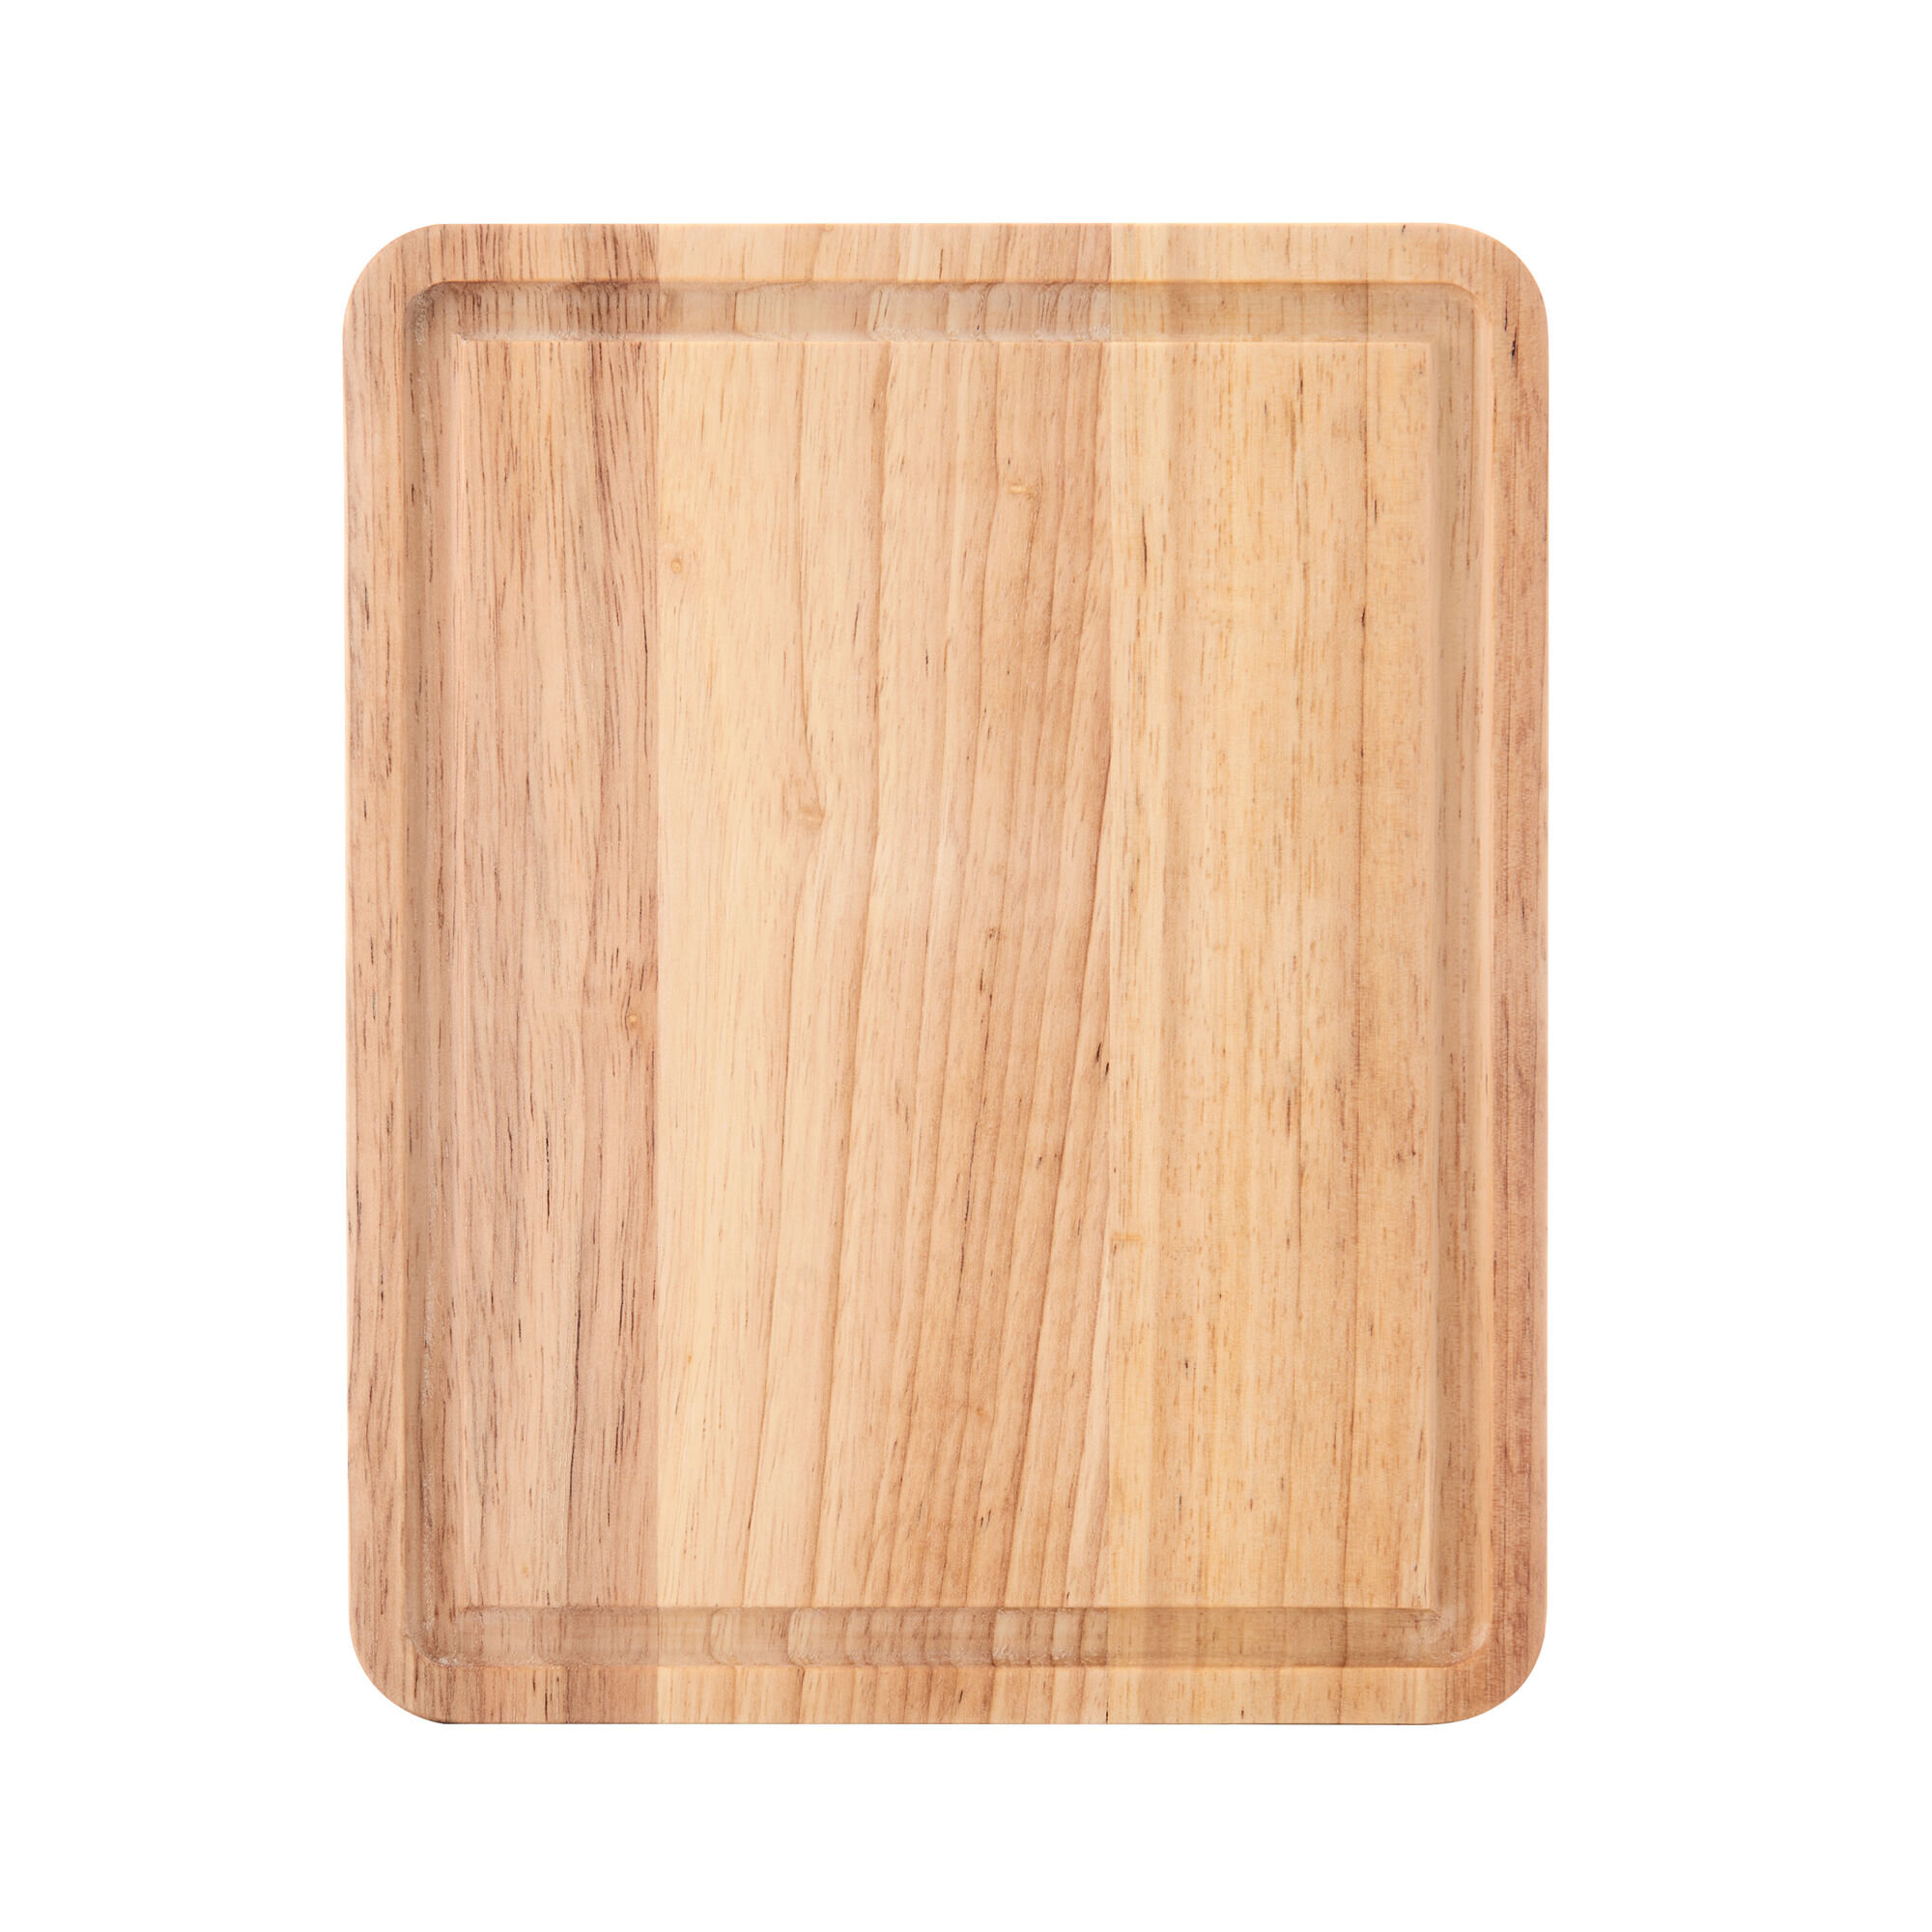 Architec 3-Piece Poly Reversible Cutting Boards Set, Assorted Sizes, Blue